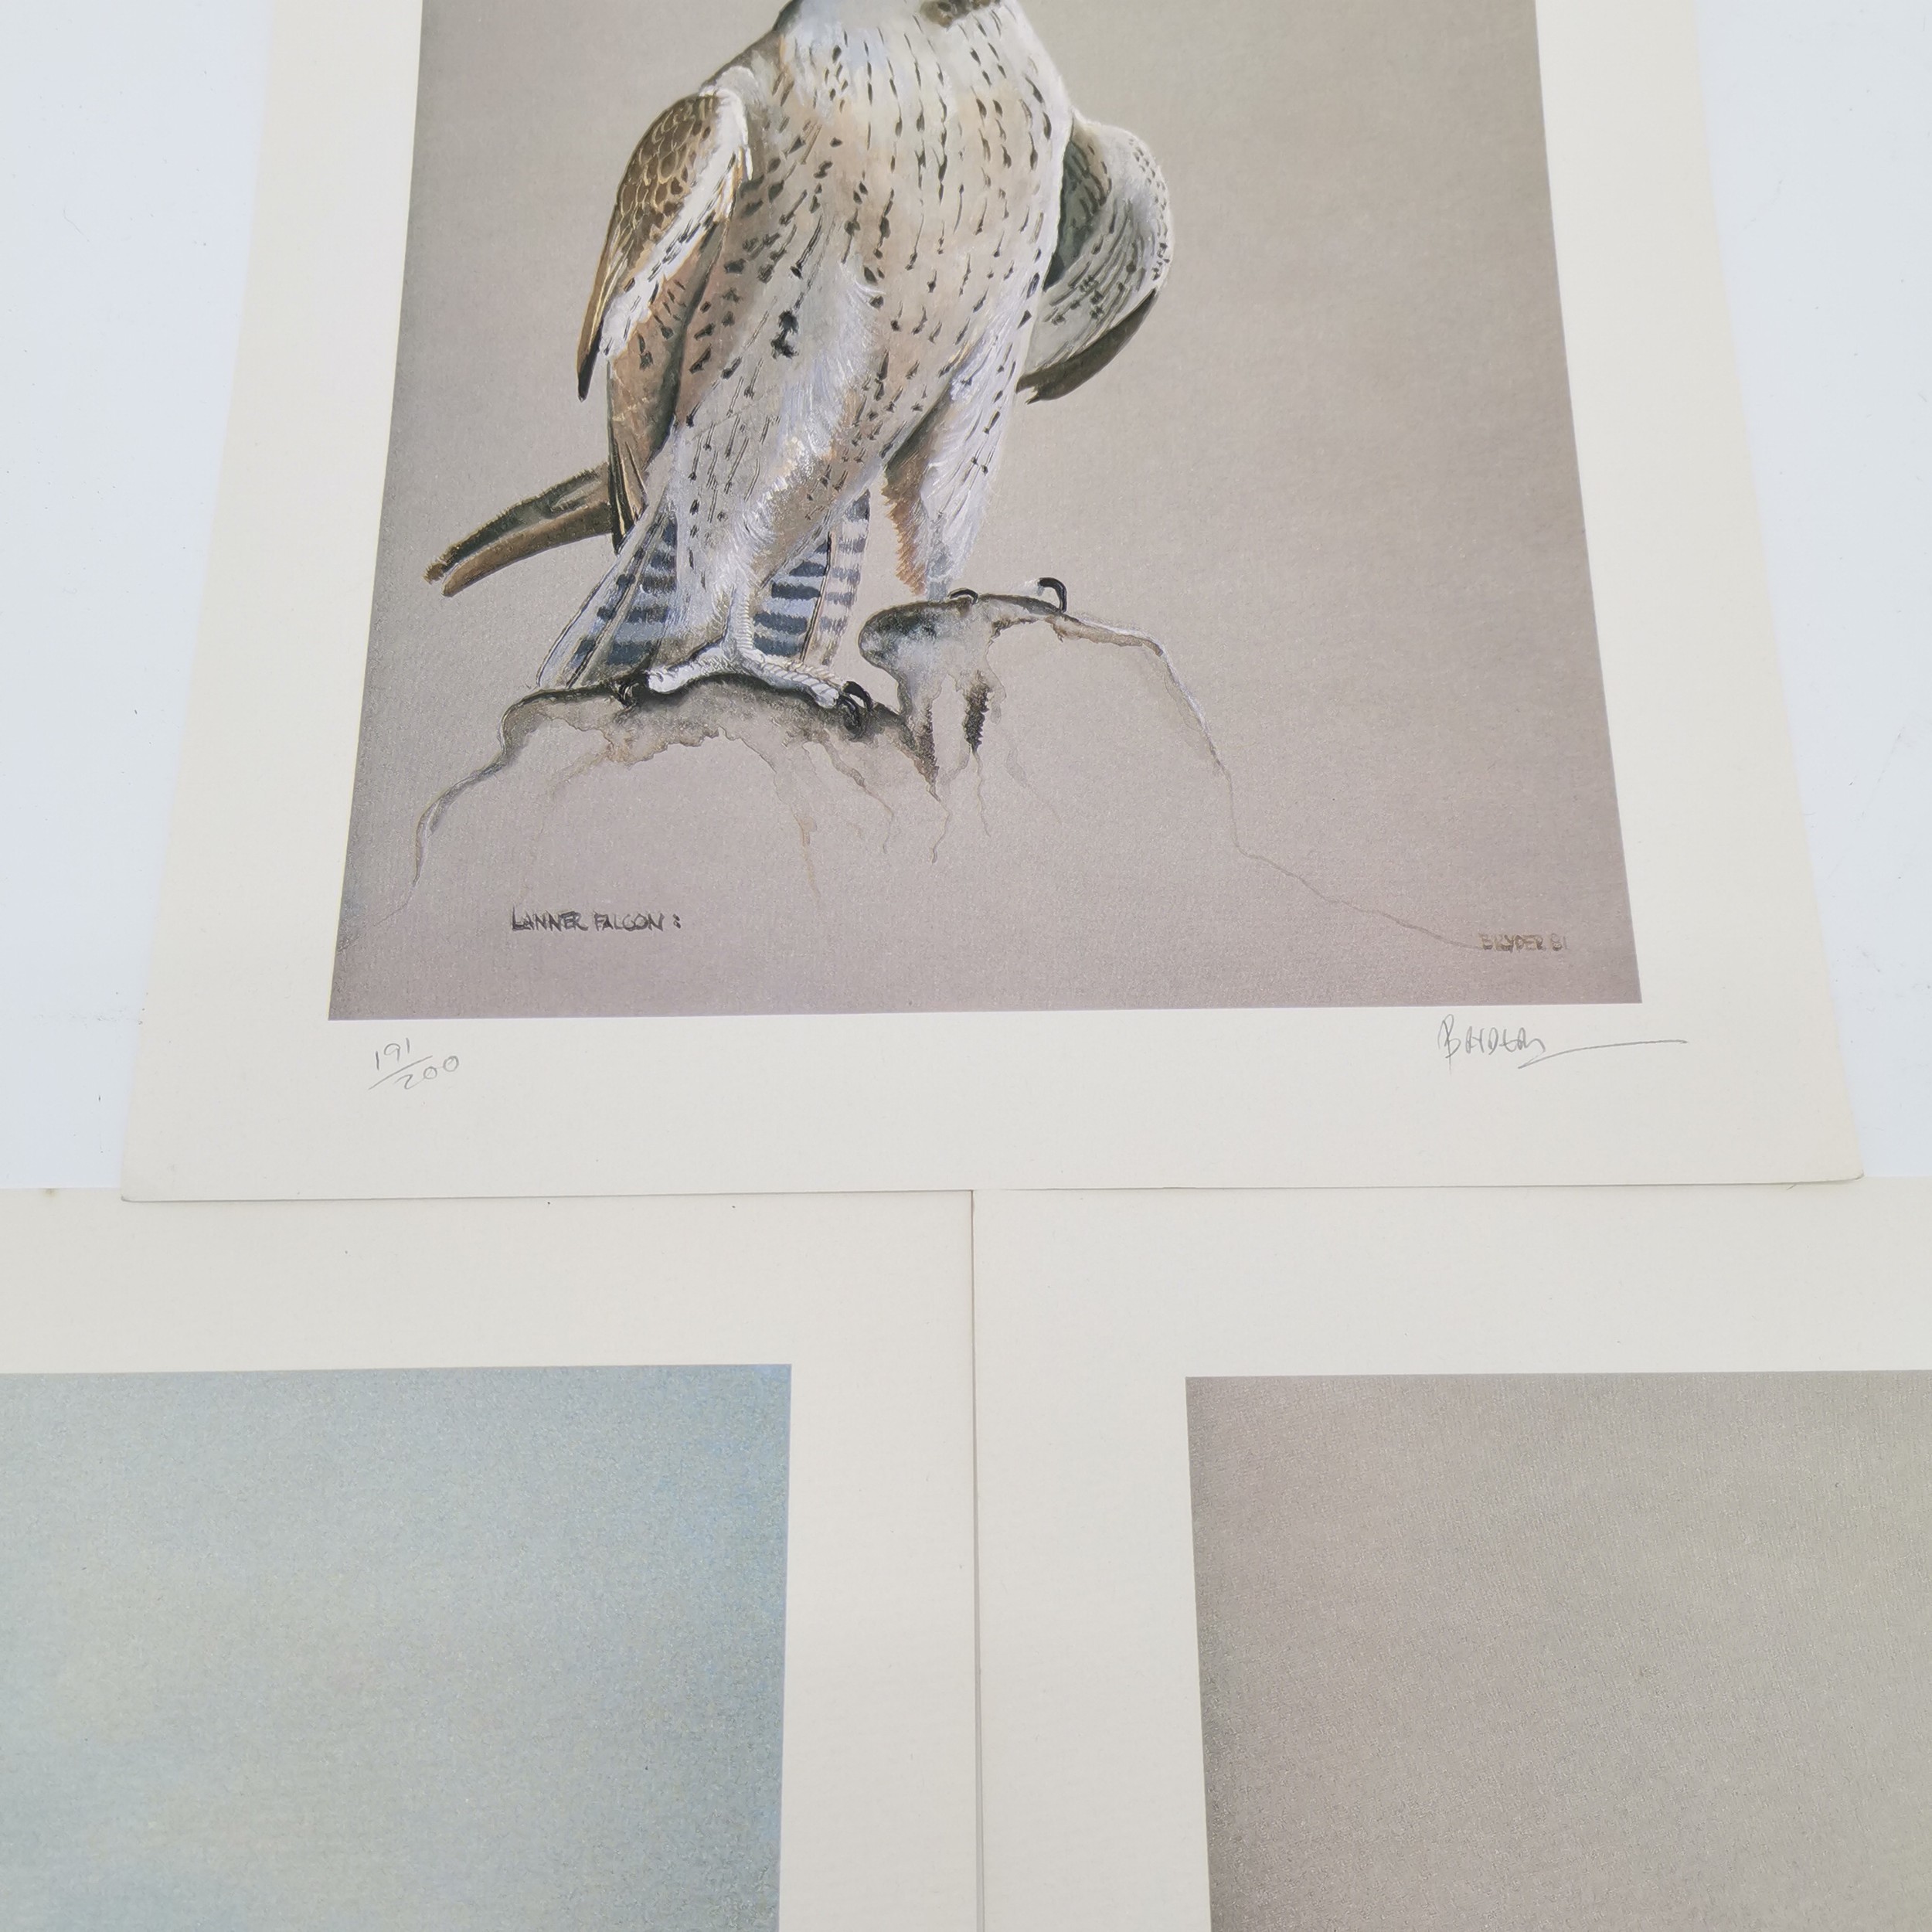 3 x signed prints of falcons - 2 by B Ryder & 1 by Richard Constable (1932-2015) - 37cm x 28cm ~ all - Image 3 of 4